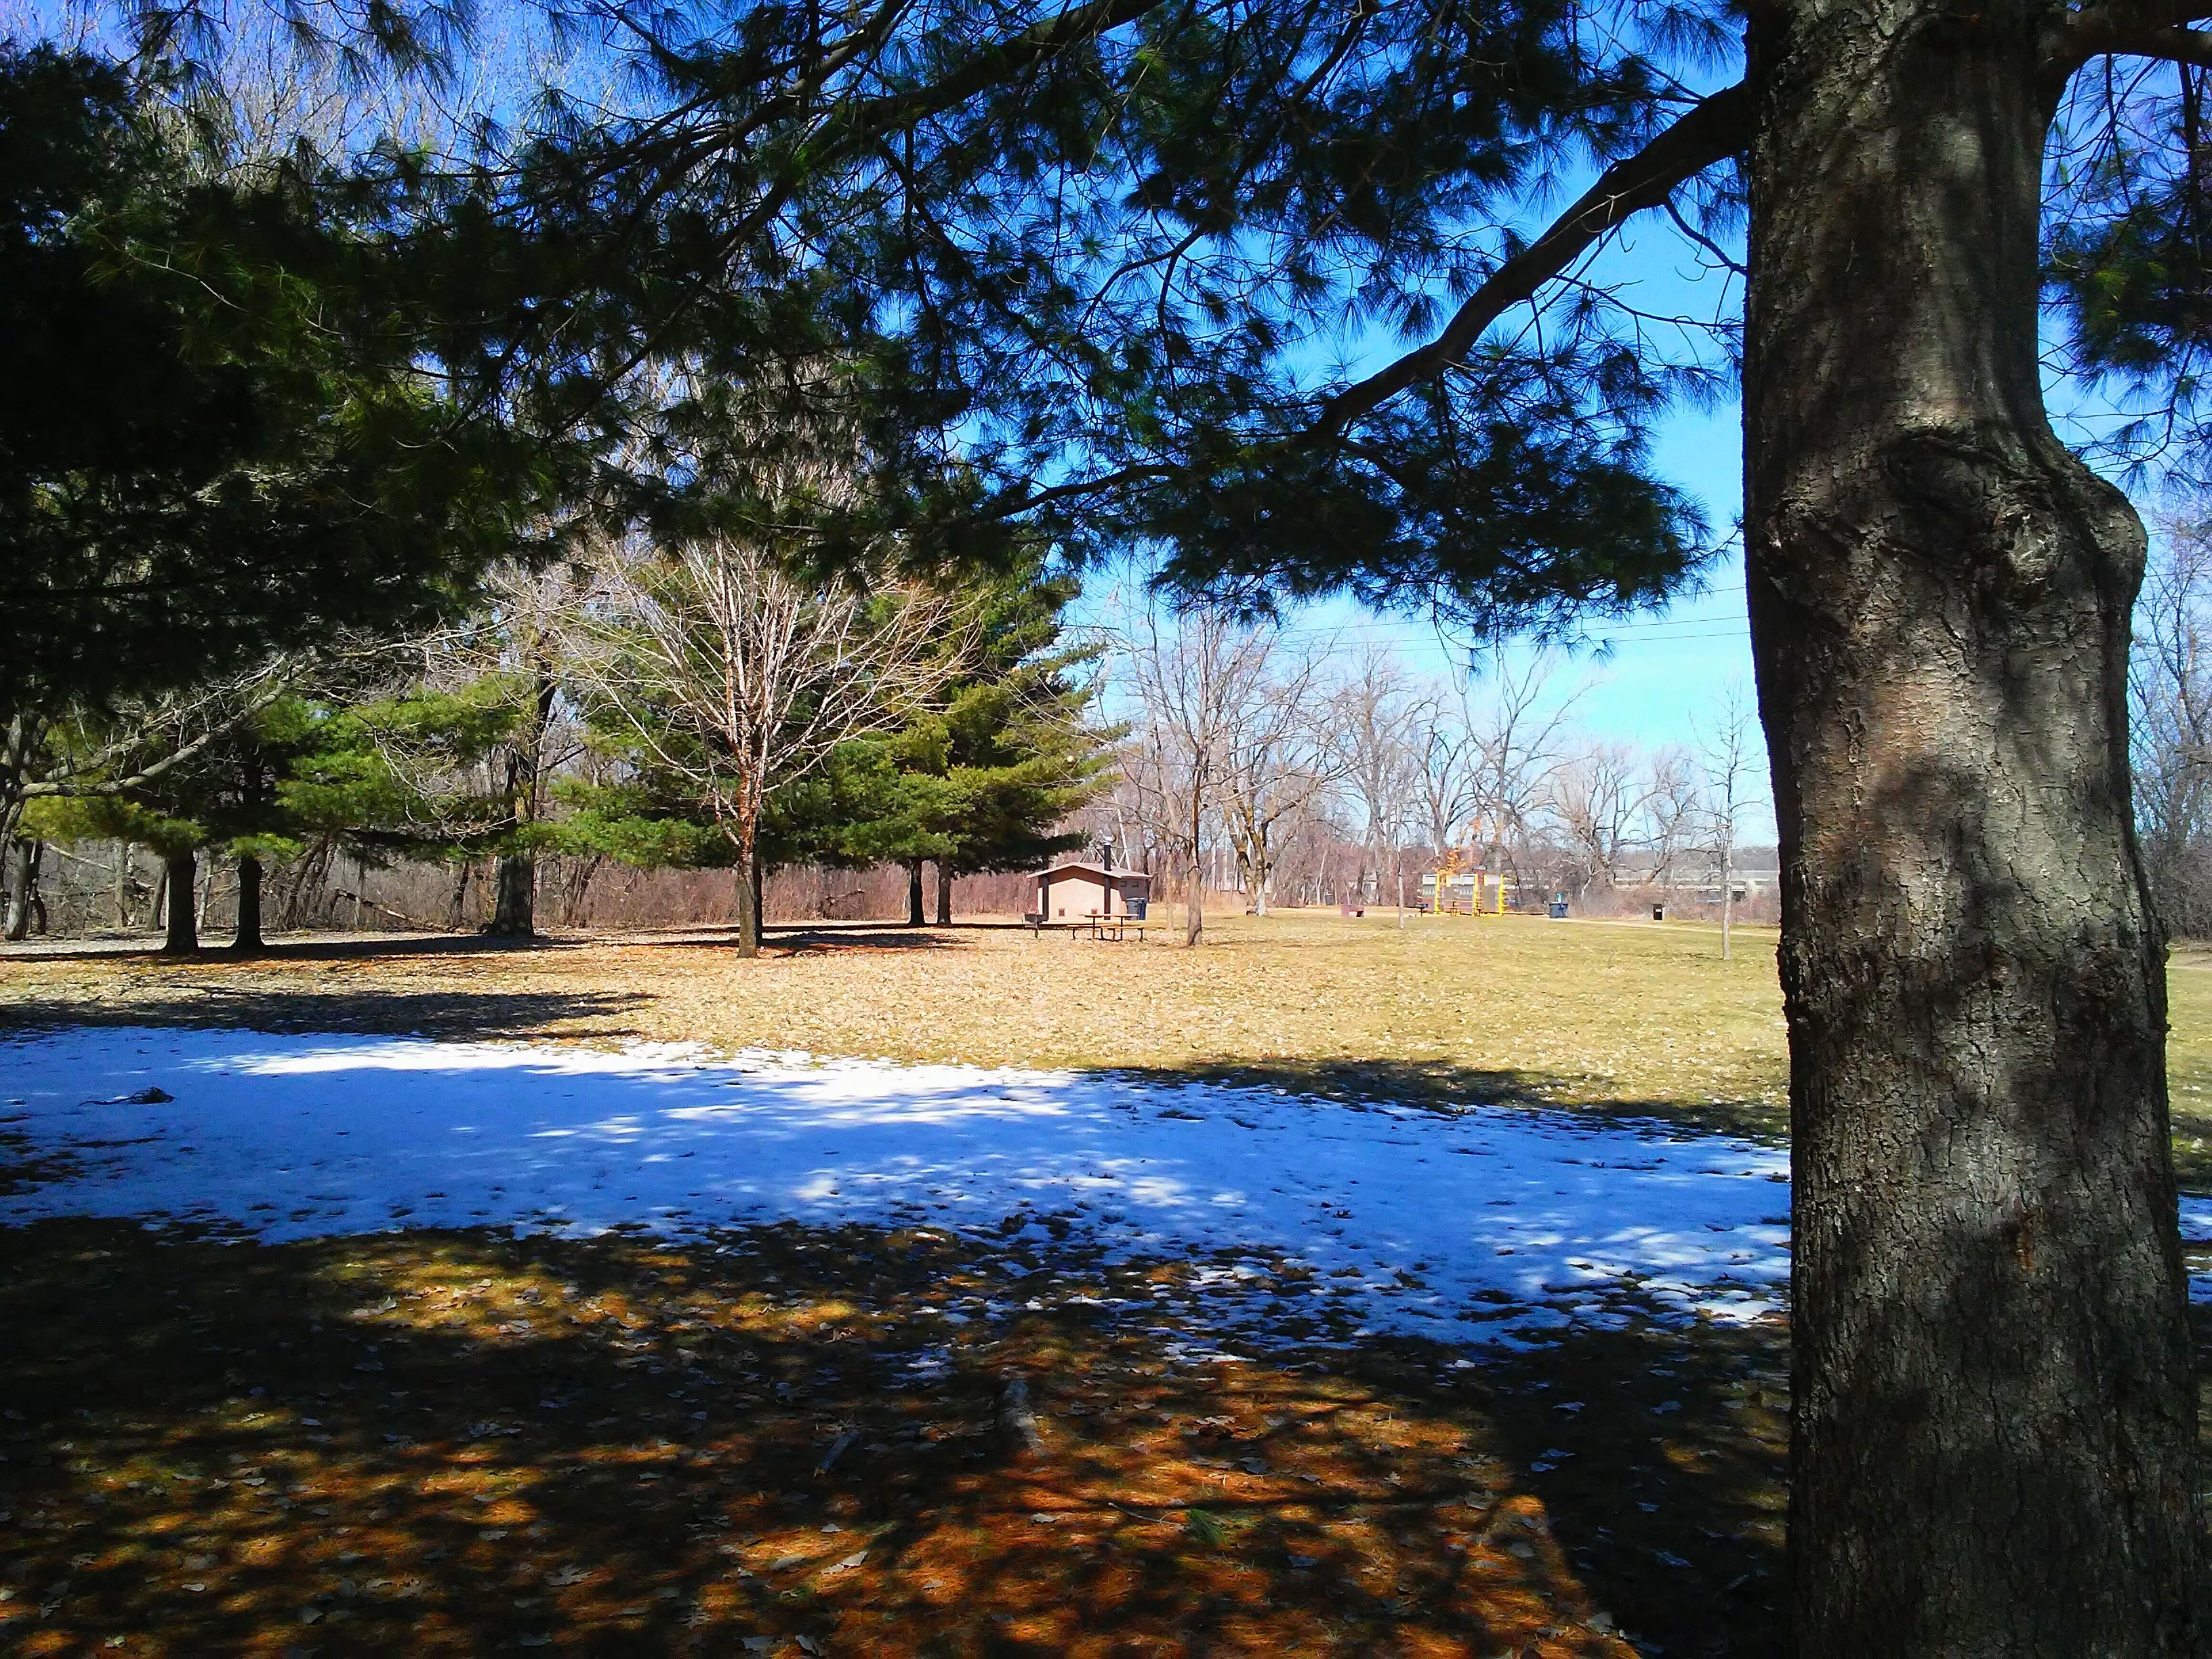 tree in foreground, a patch of snow on the ground